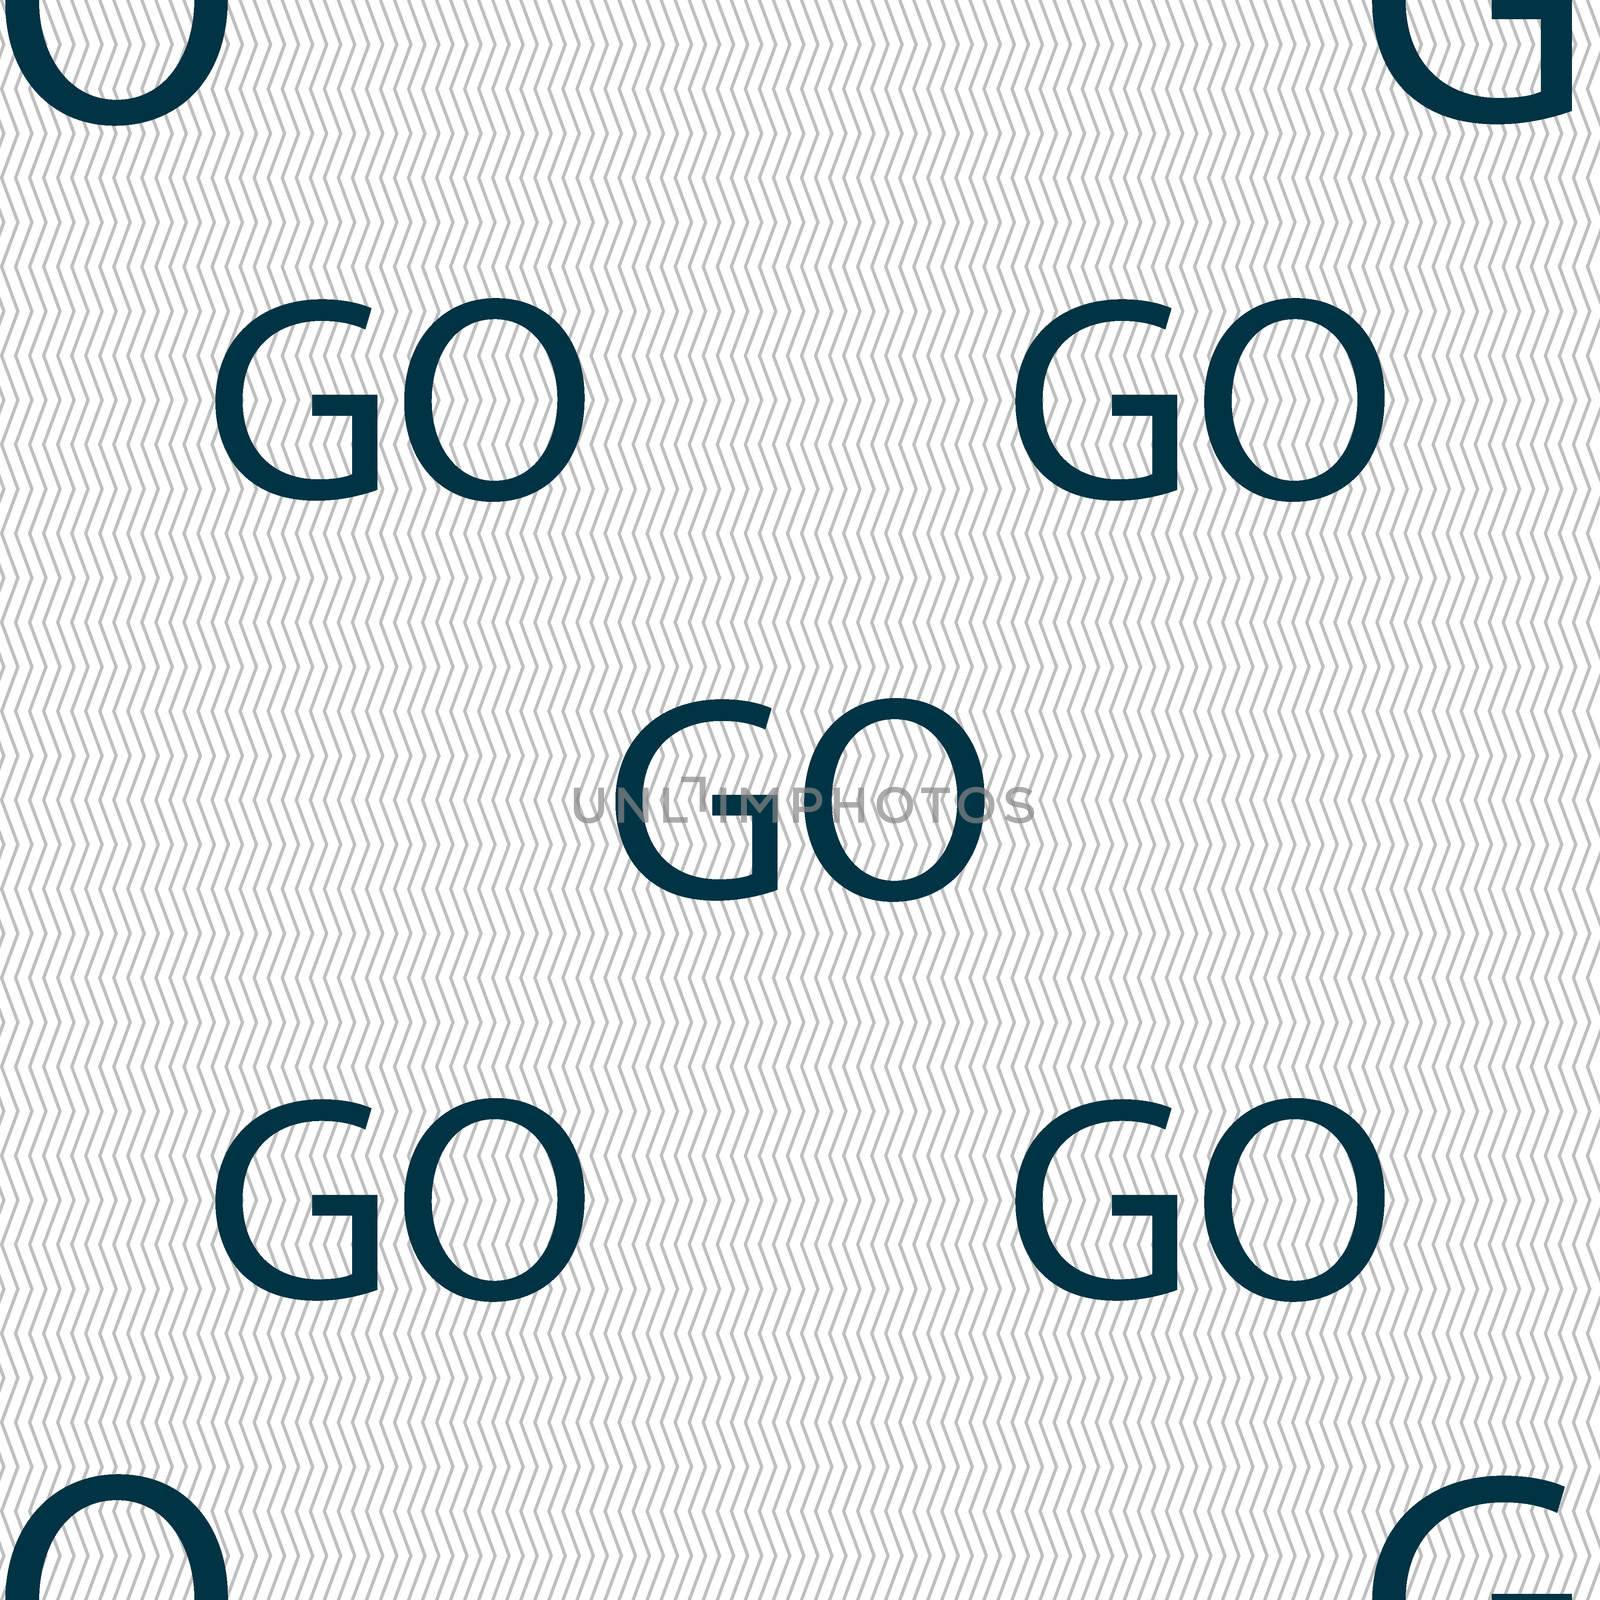 GO sign icon. Seamless abstract background with geometric shapes. illustration